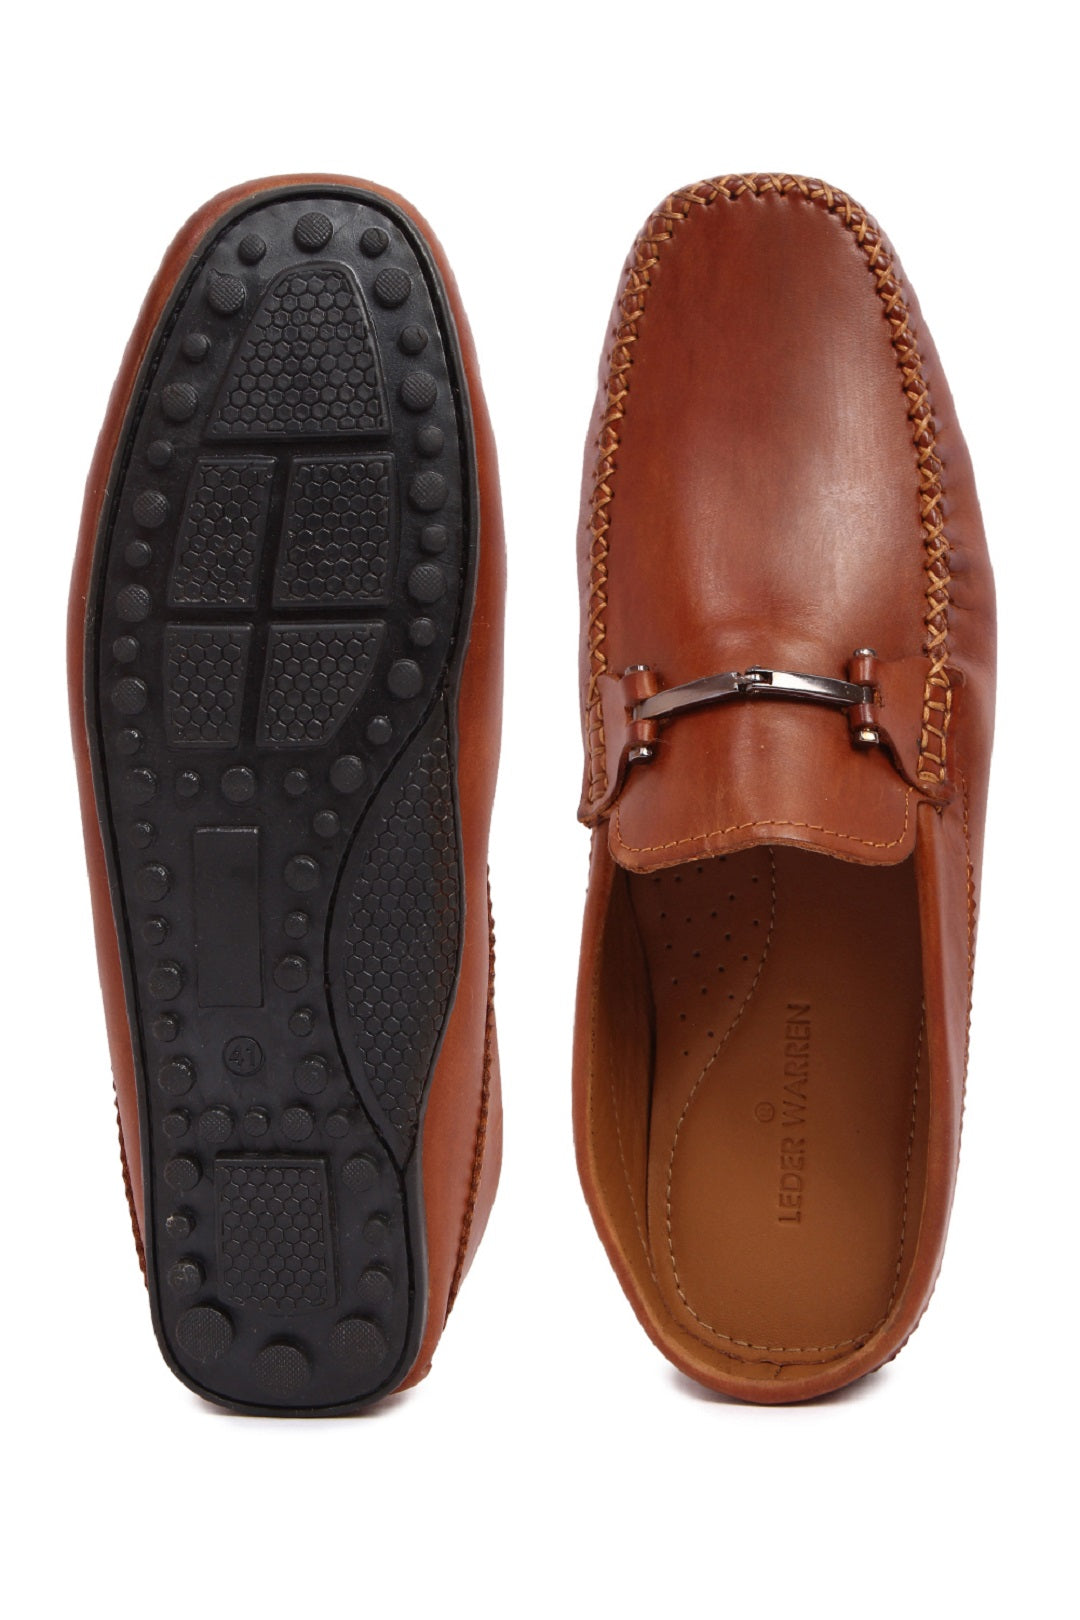 LOAFER SHOES Giovanni Mules Shoes leaderwarren